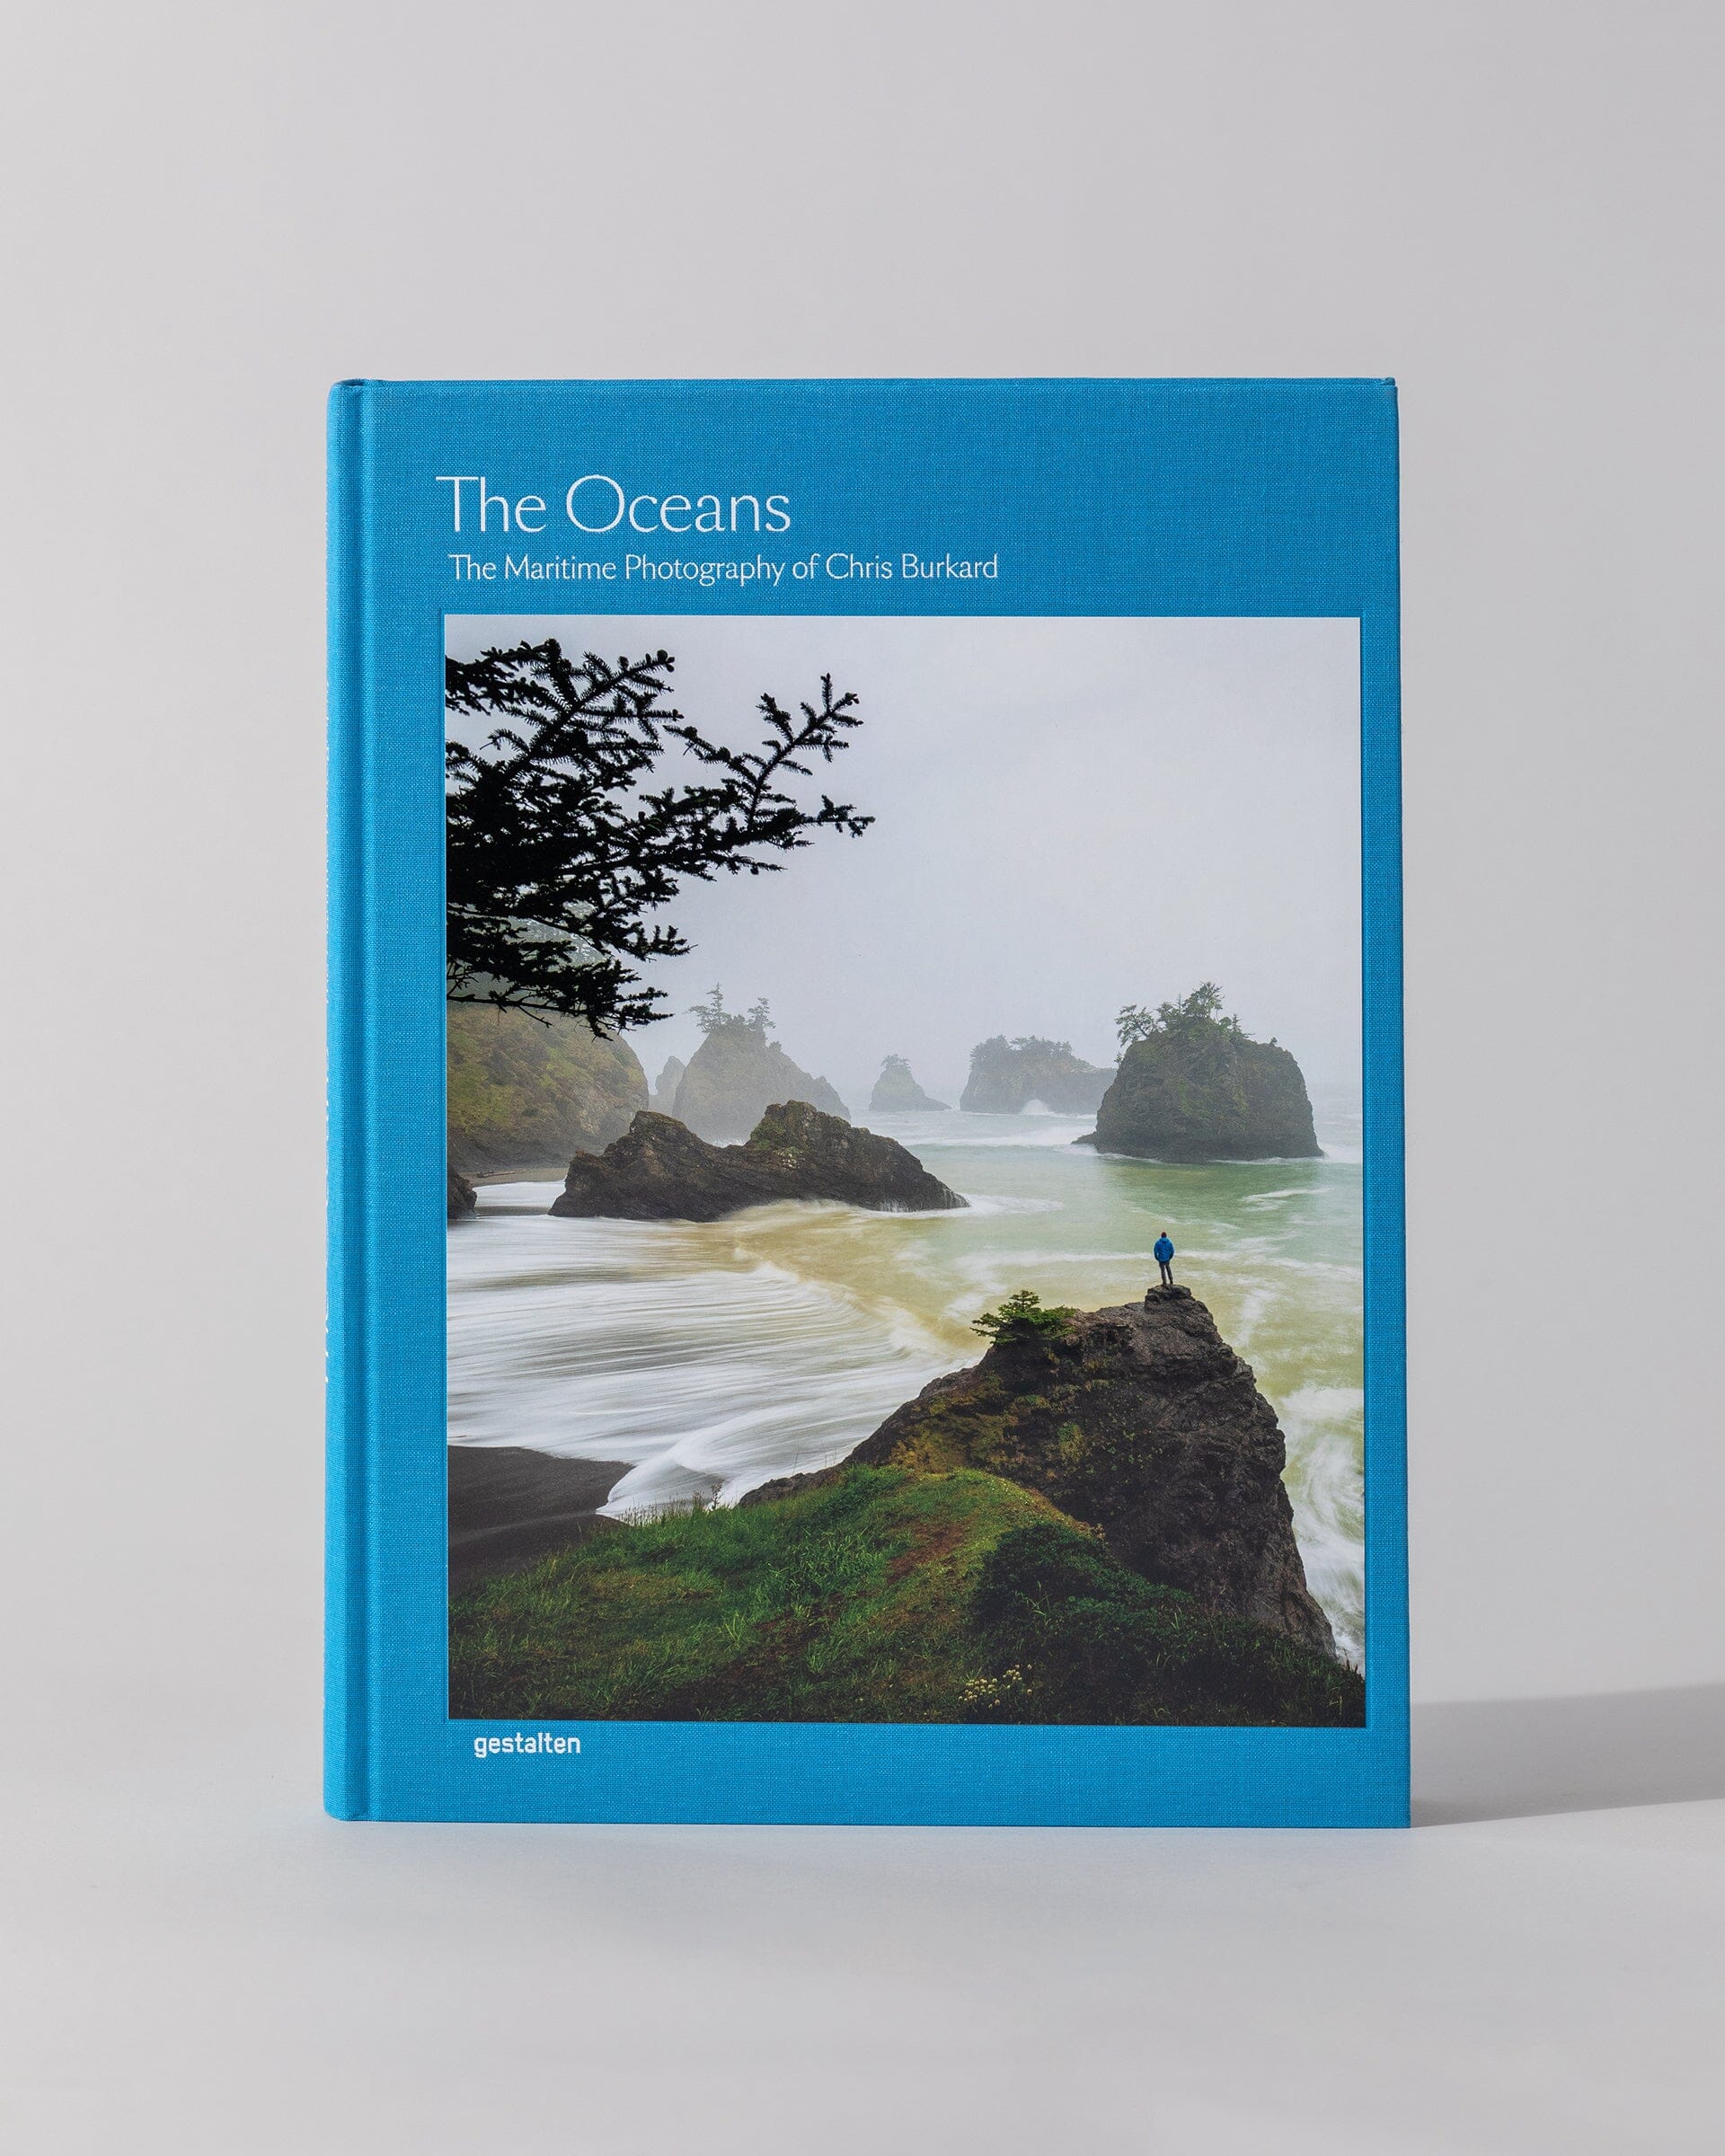 The Oceans: The Maritime Photography of Chris Burkard